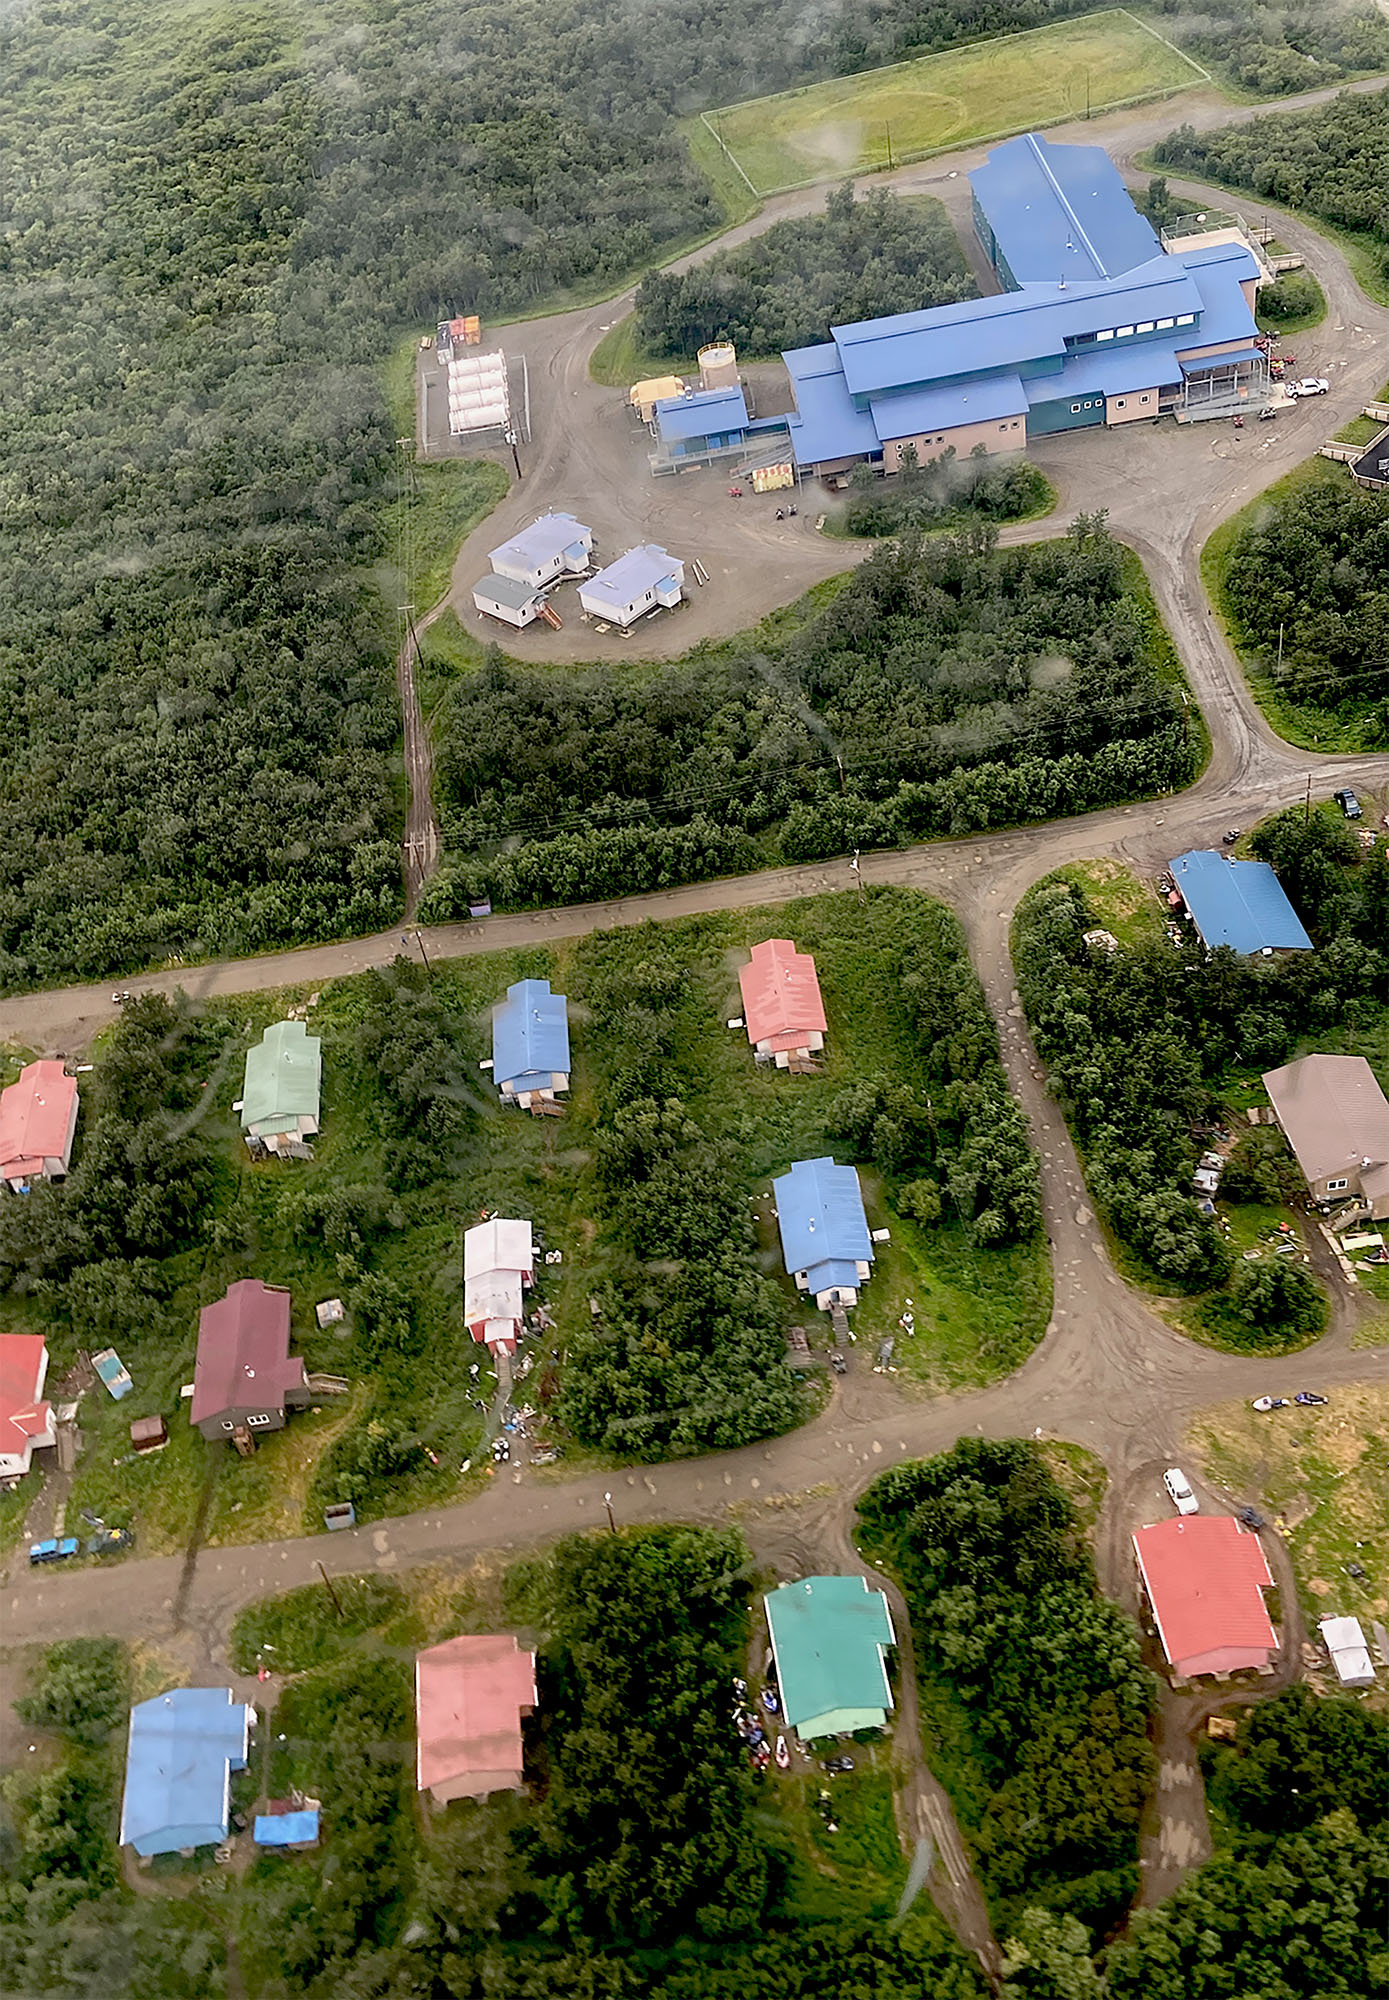 From an aerial view, surrounded by trees is a building with smaller structures in front of it.